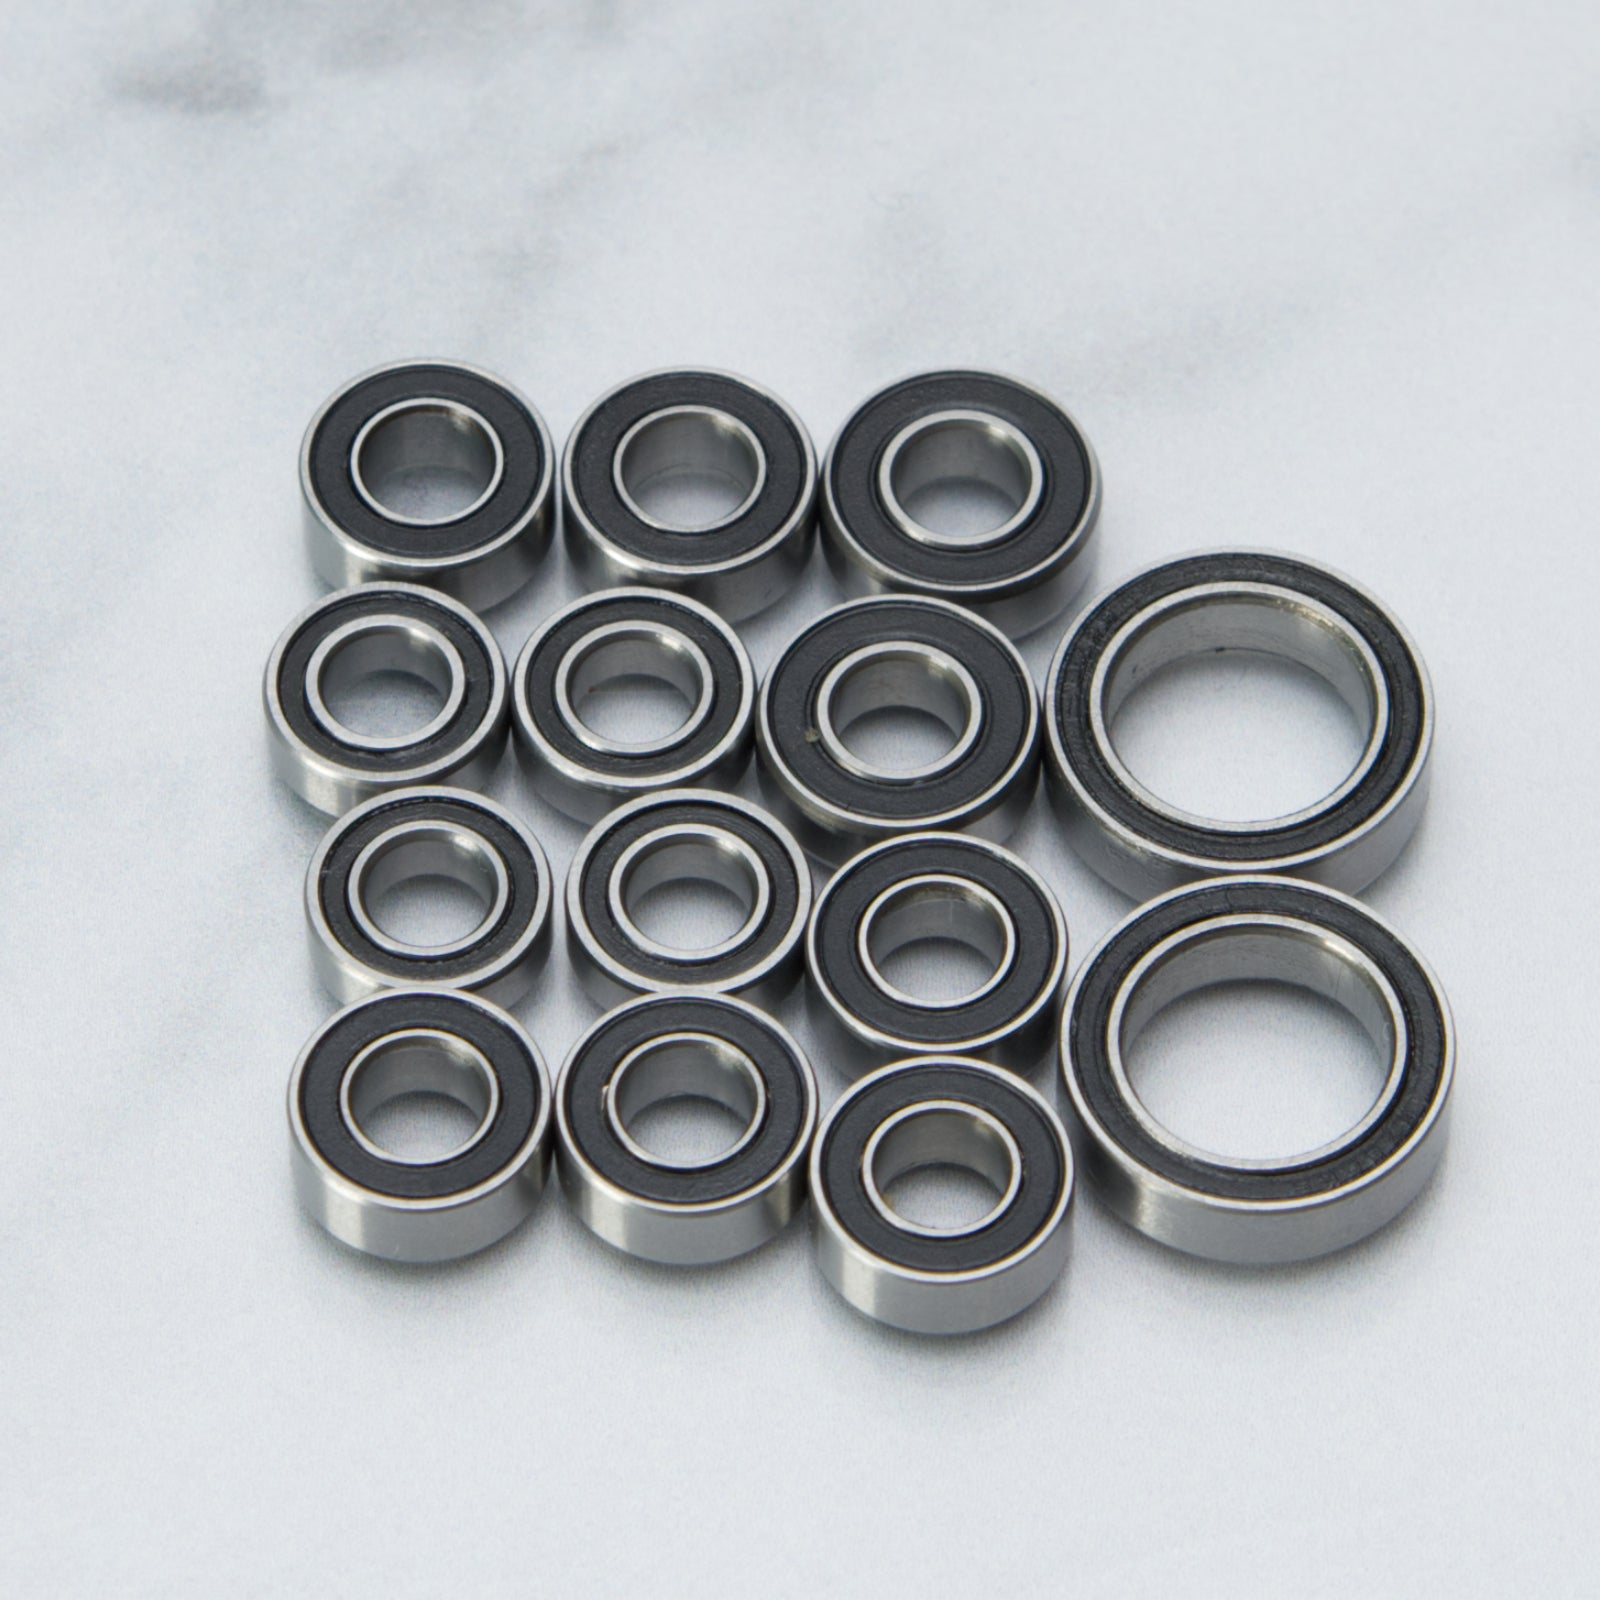 Duratrax Evader DT, EXB, EXT, EXT2.4 - Sealed Bearing Kit